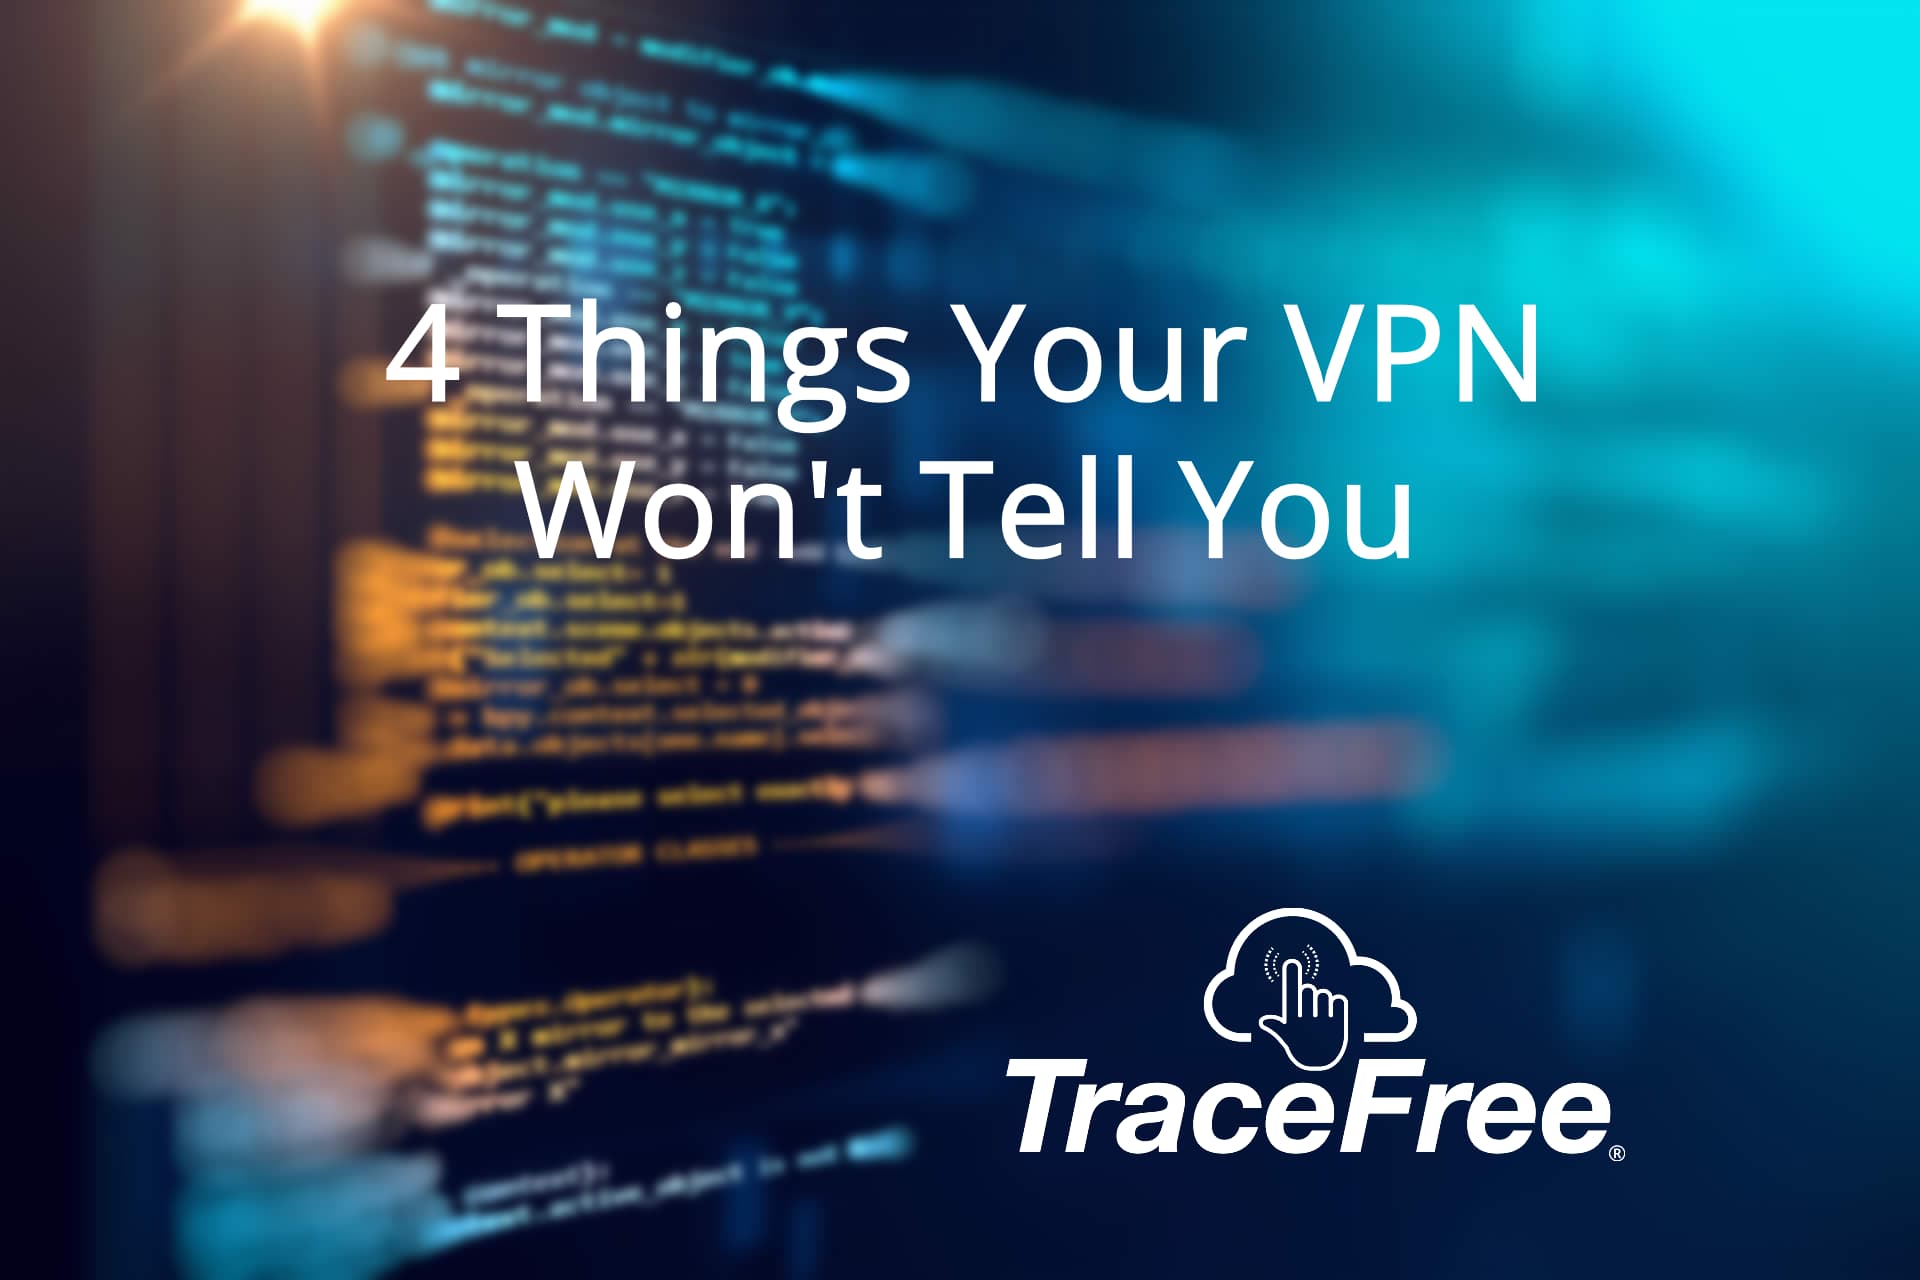 What is a VPN good for?